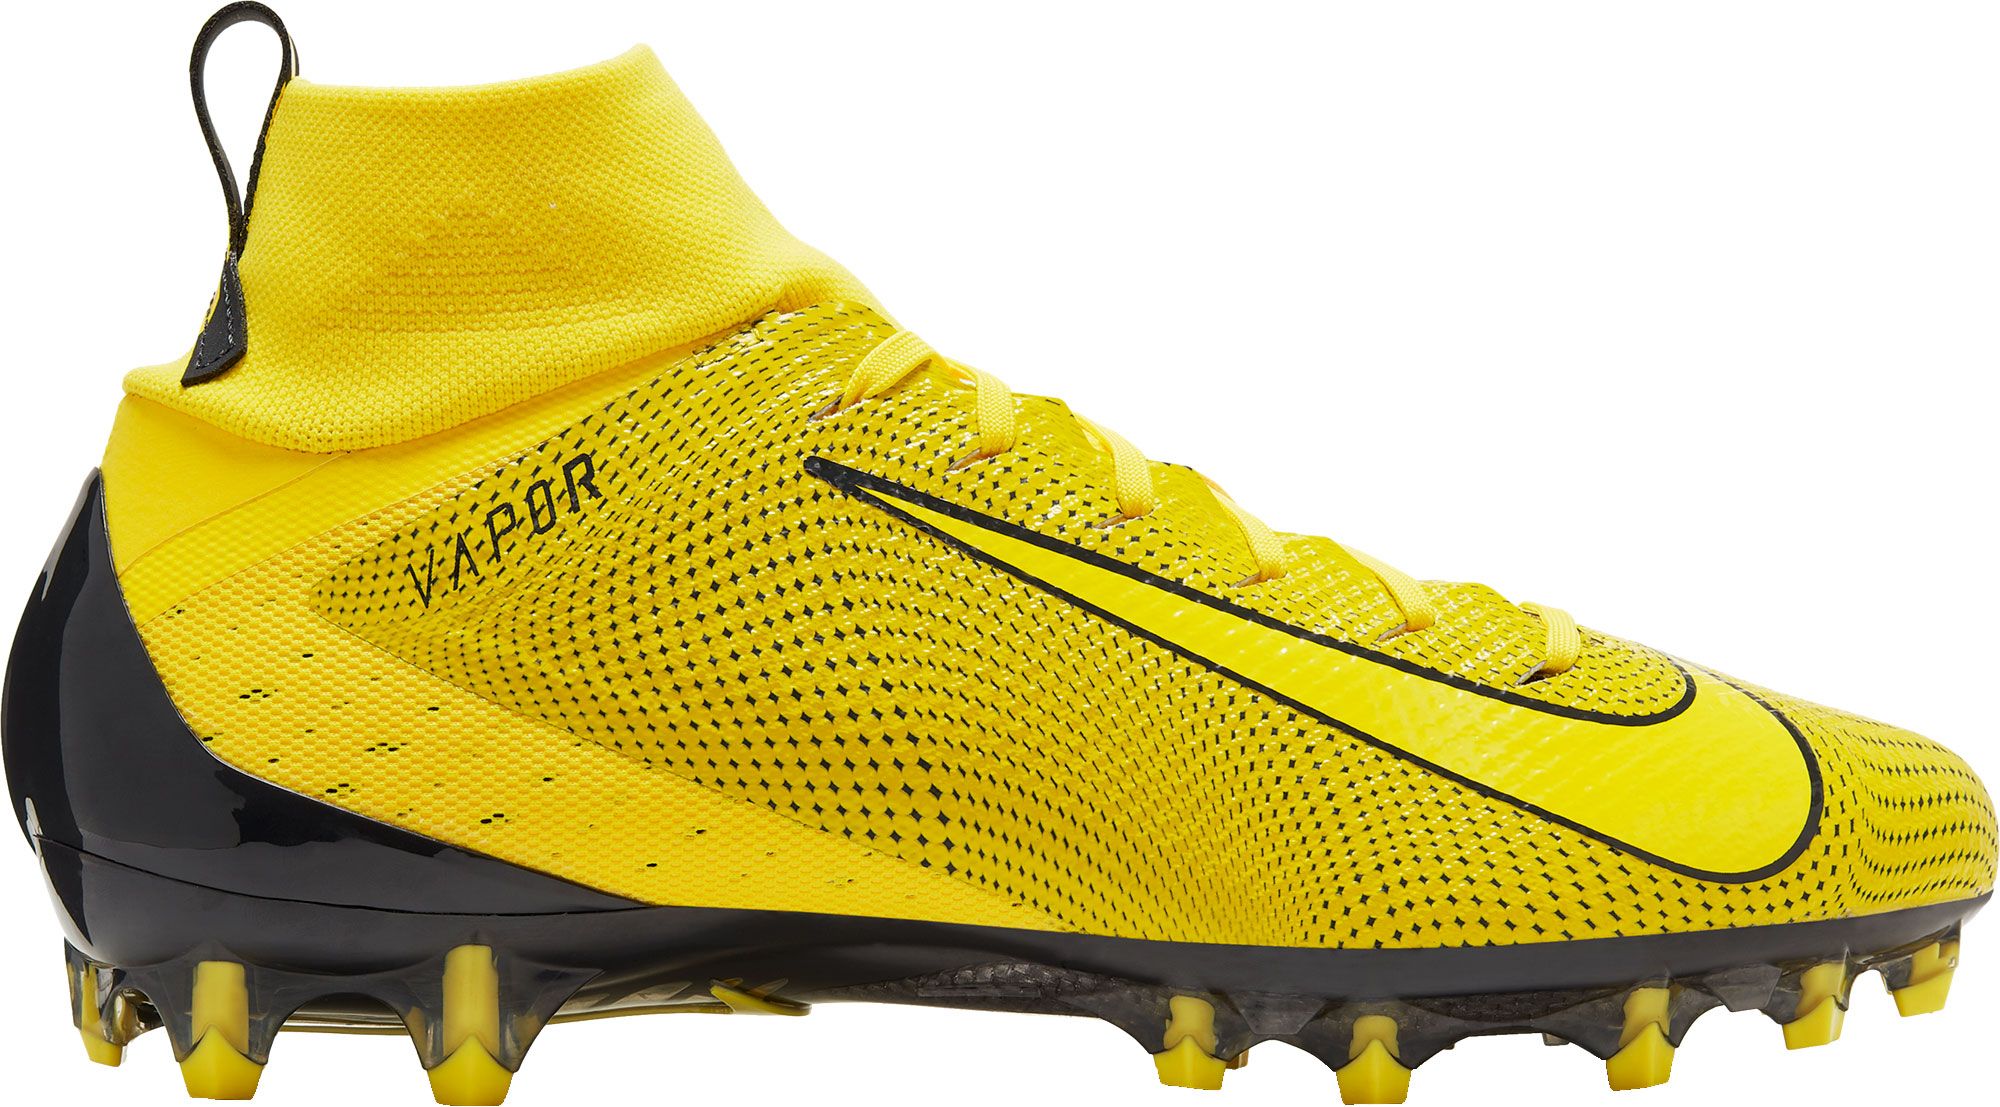 yellow and white football cleats